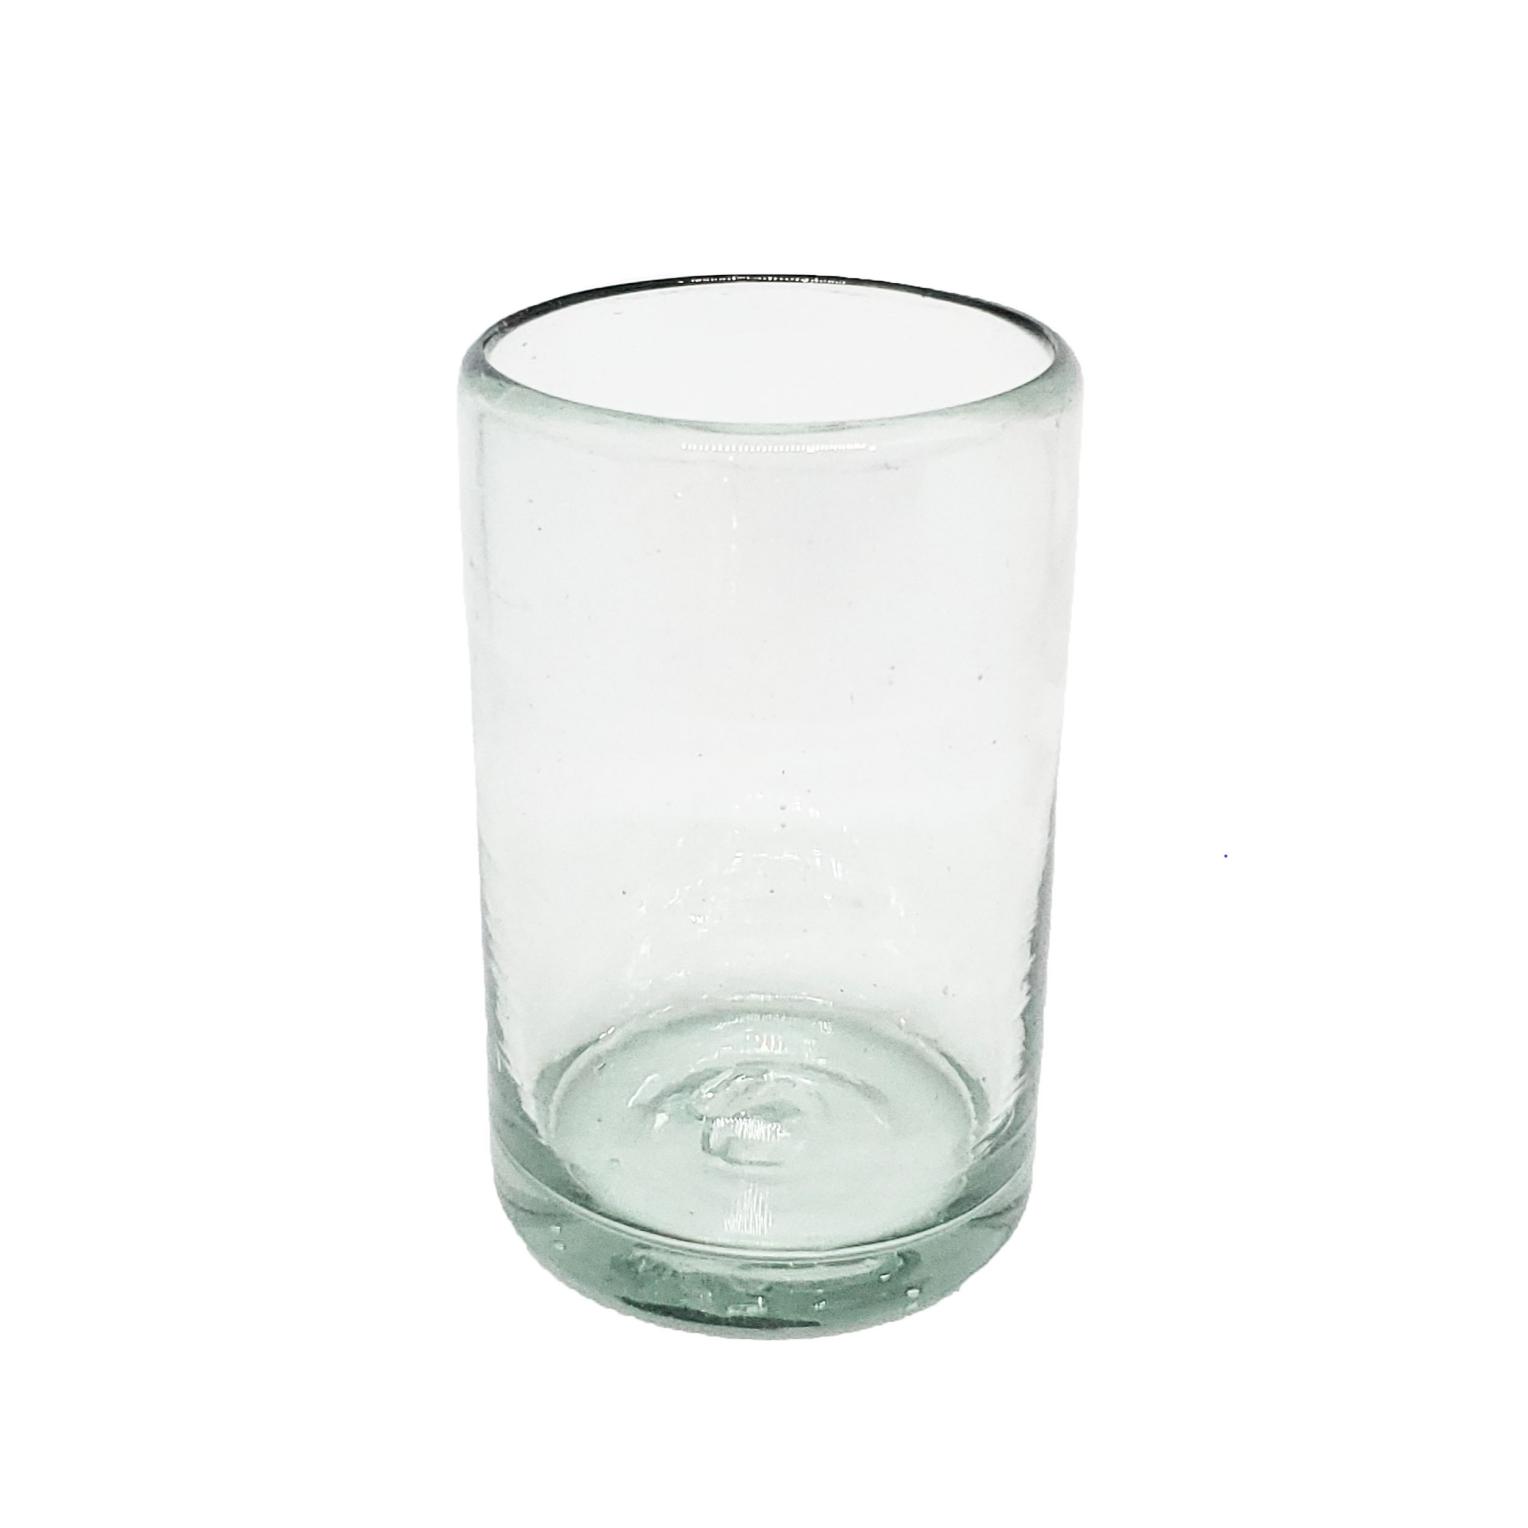 MEXICAN GLASSWARE / Clear 9 oz Juice Glasses (set of 6) / These handcrafted glasses deliver a classic touch to your favorite drink.